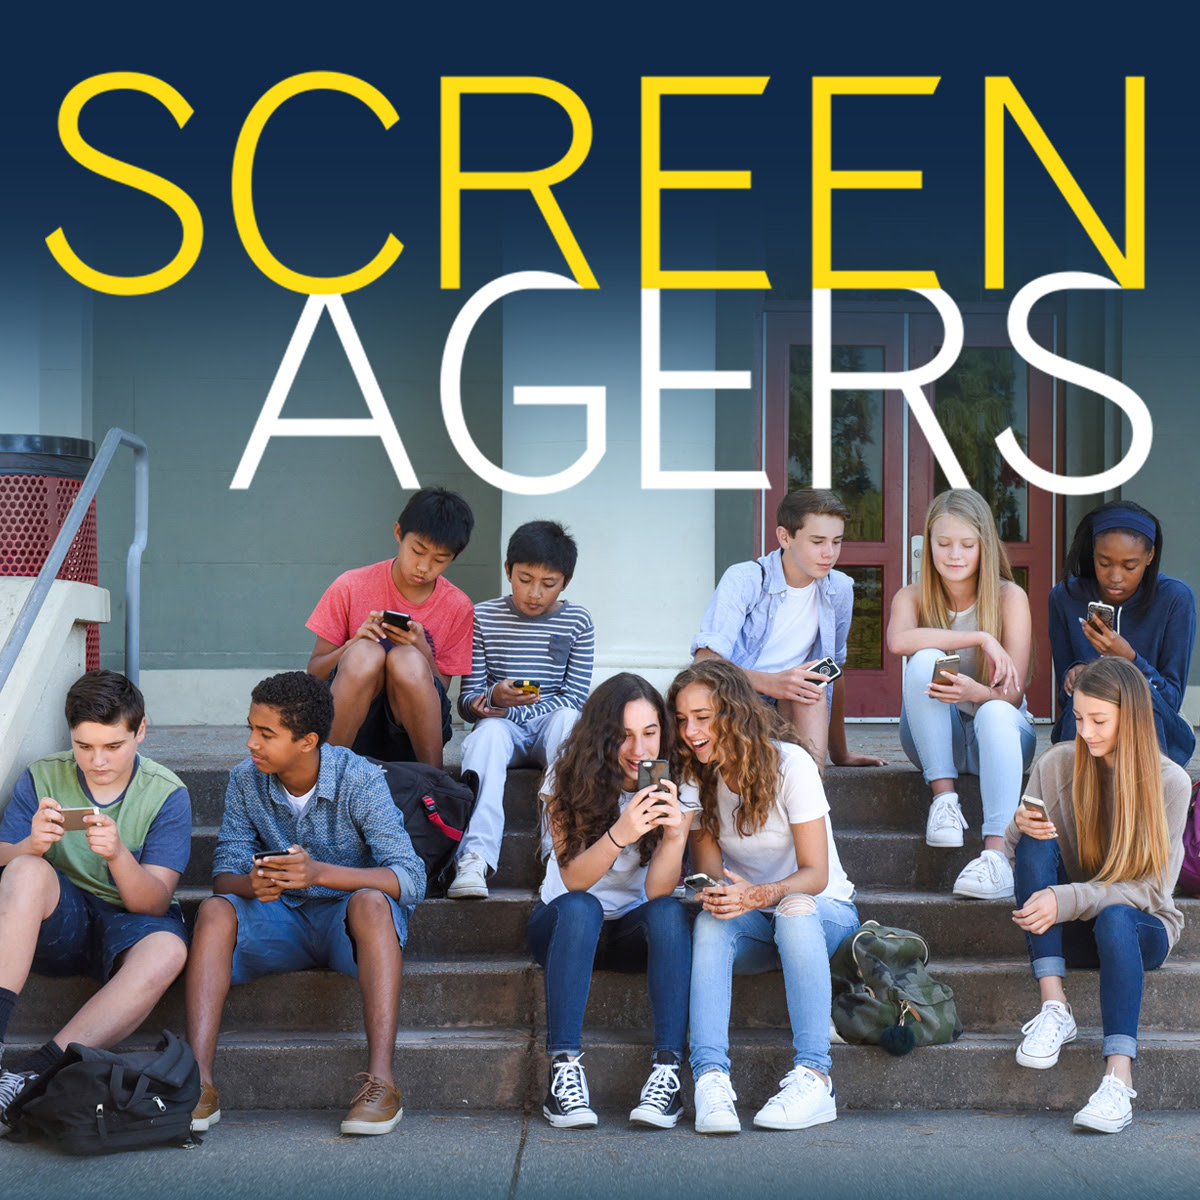 Screenagers Film Presented By Your Choicez